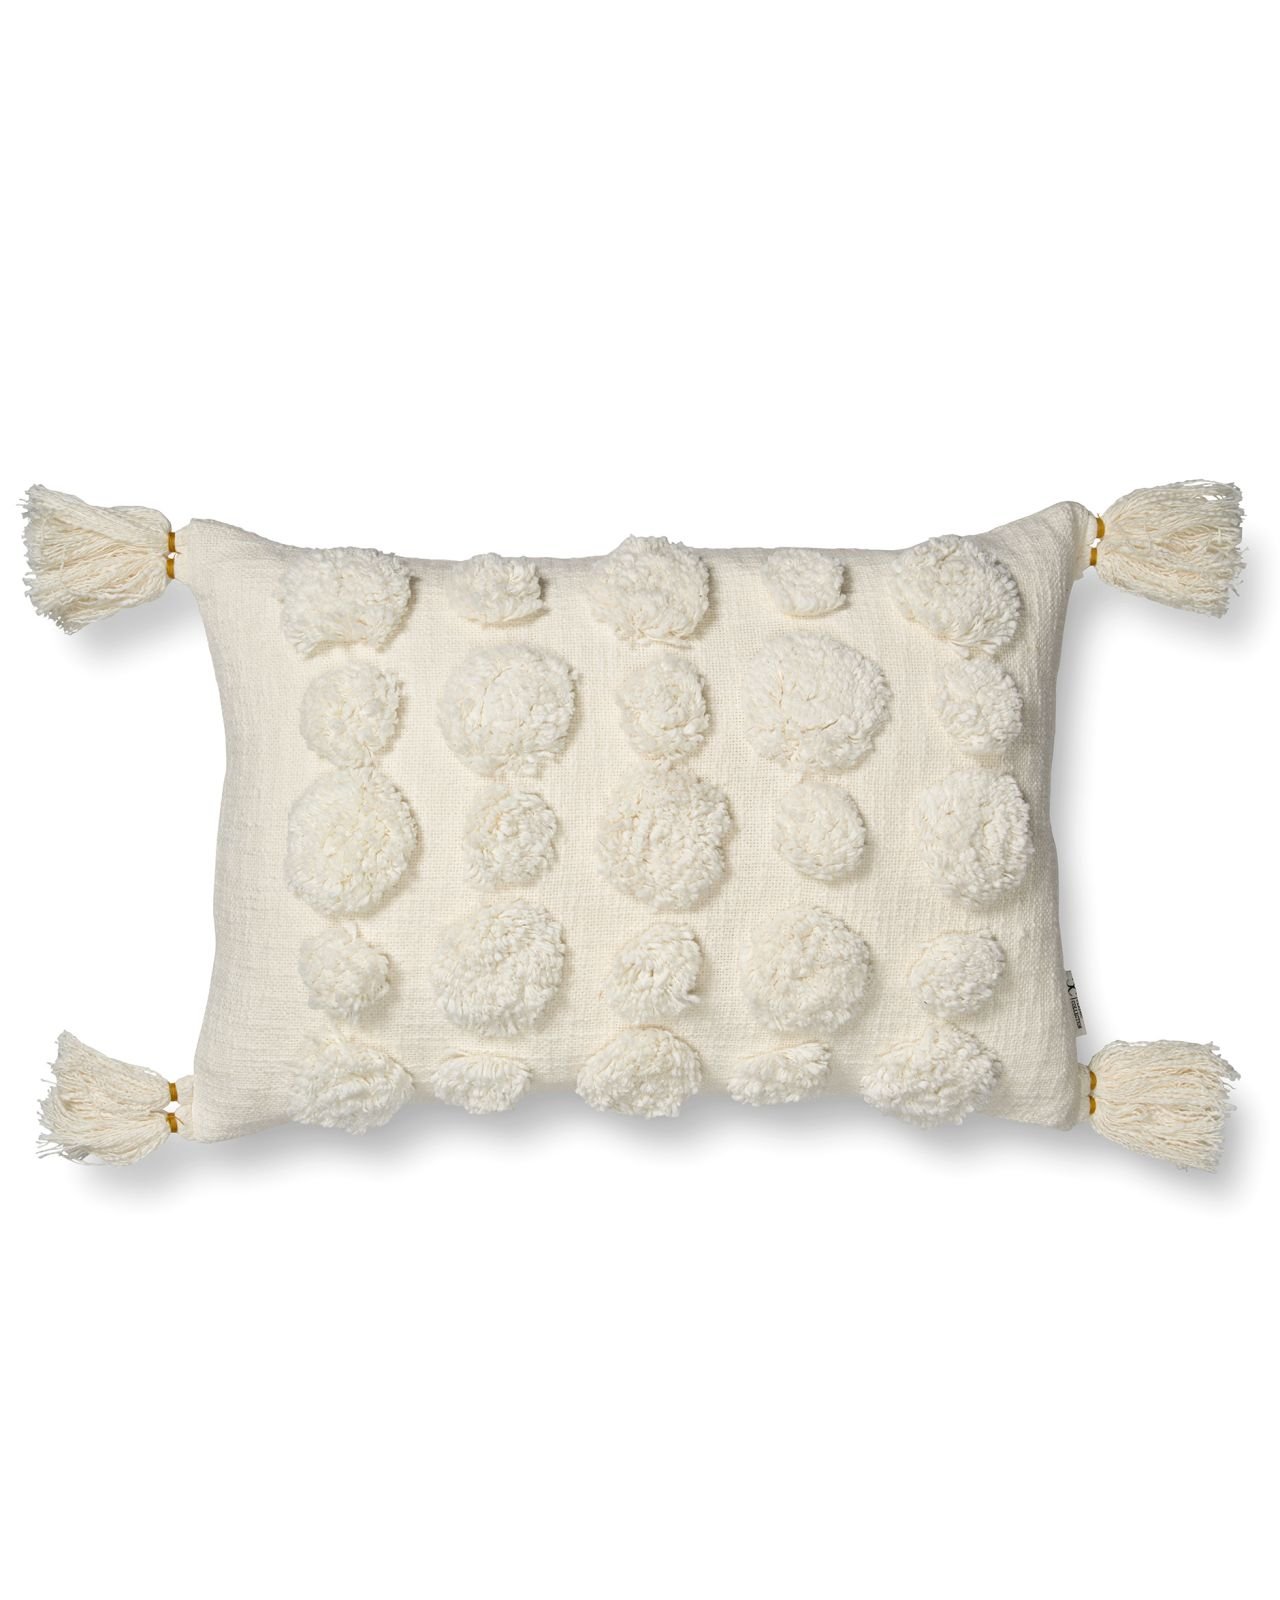 Trysil Cushion Cover White